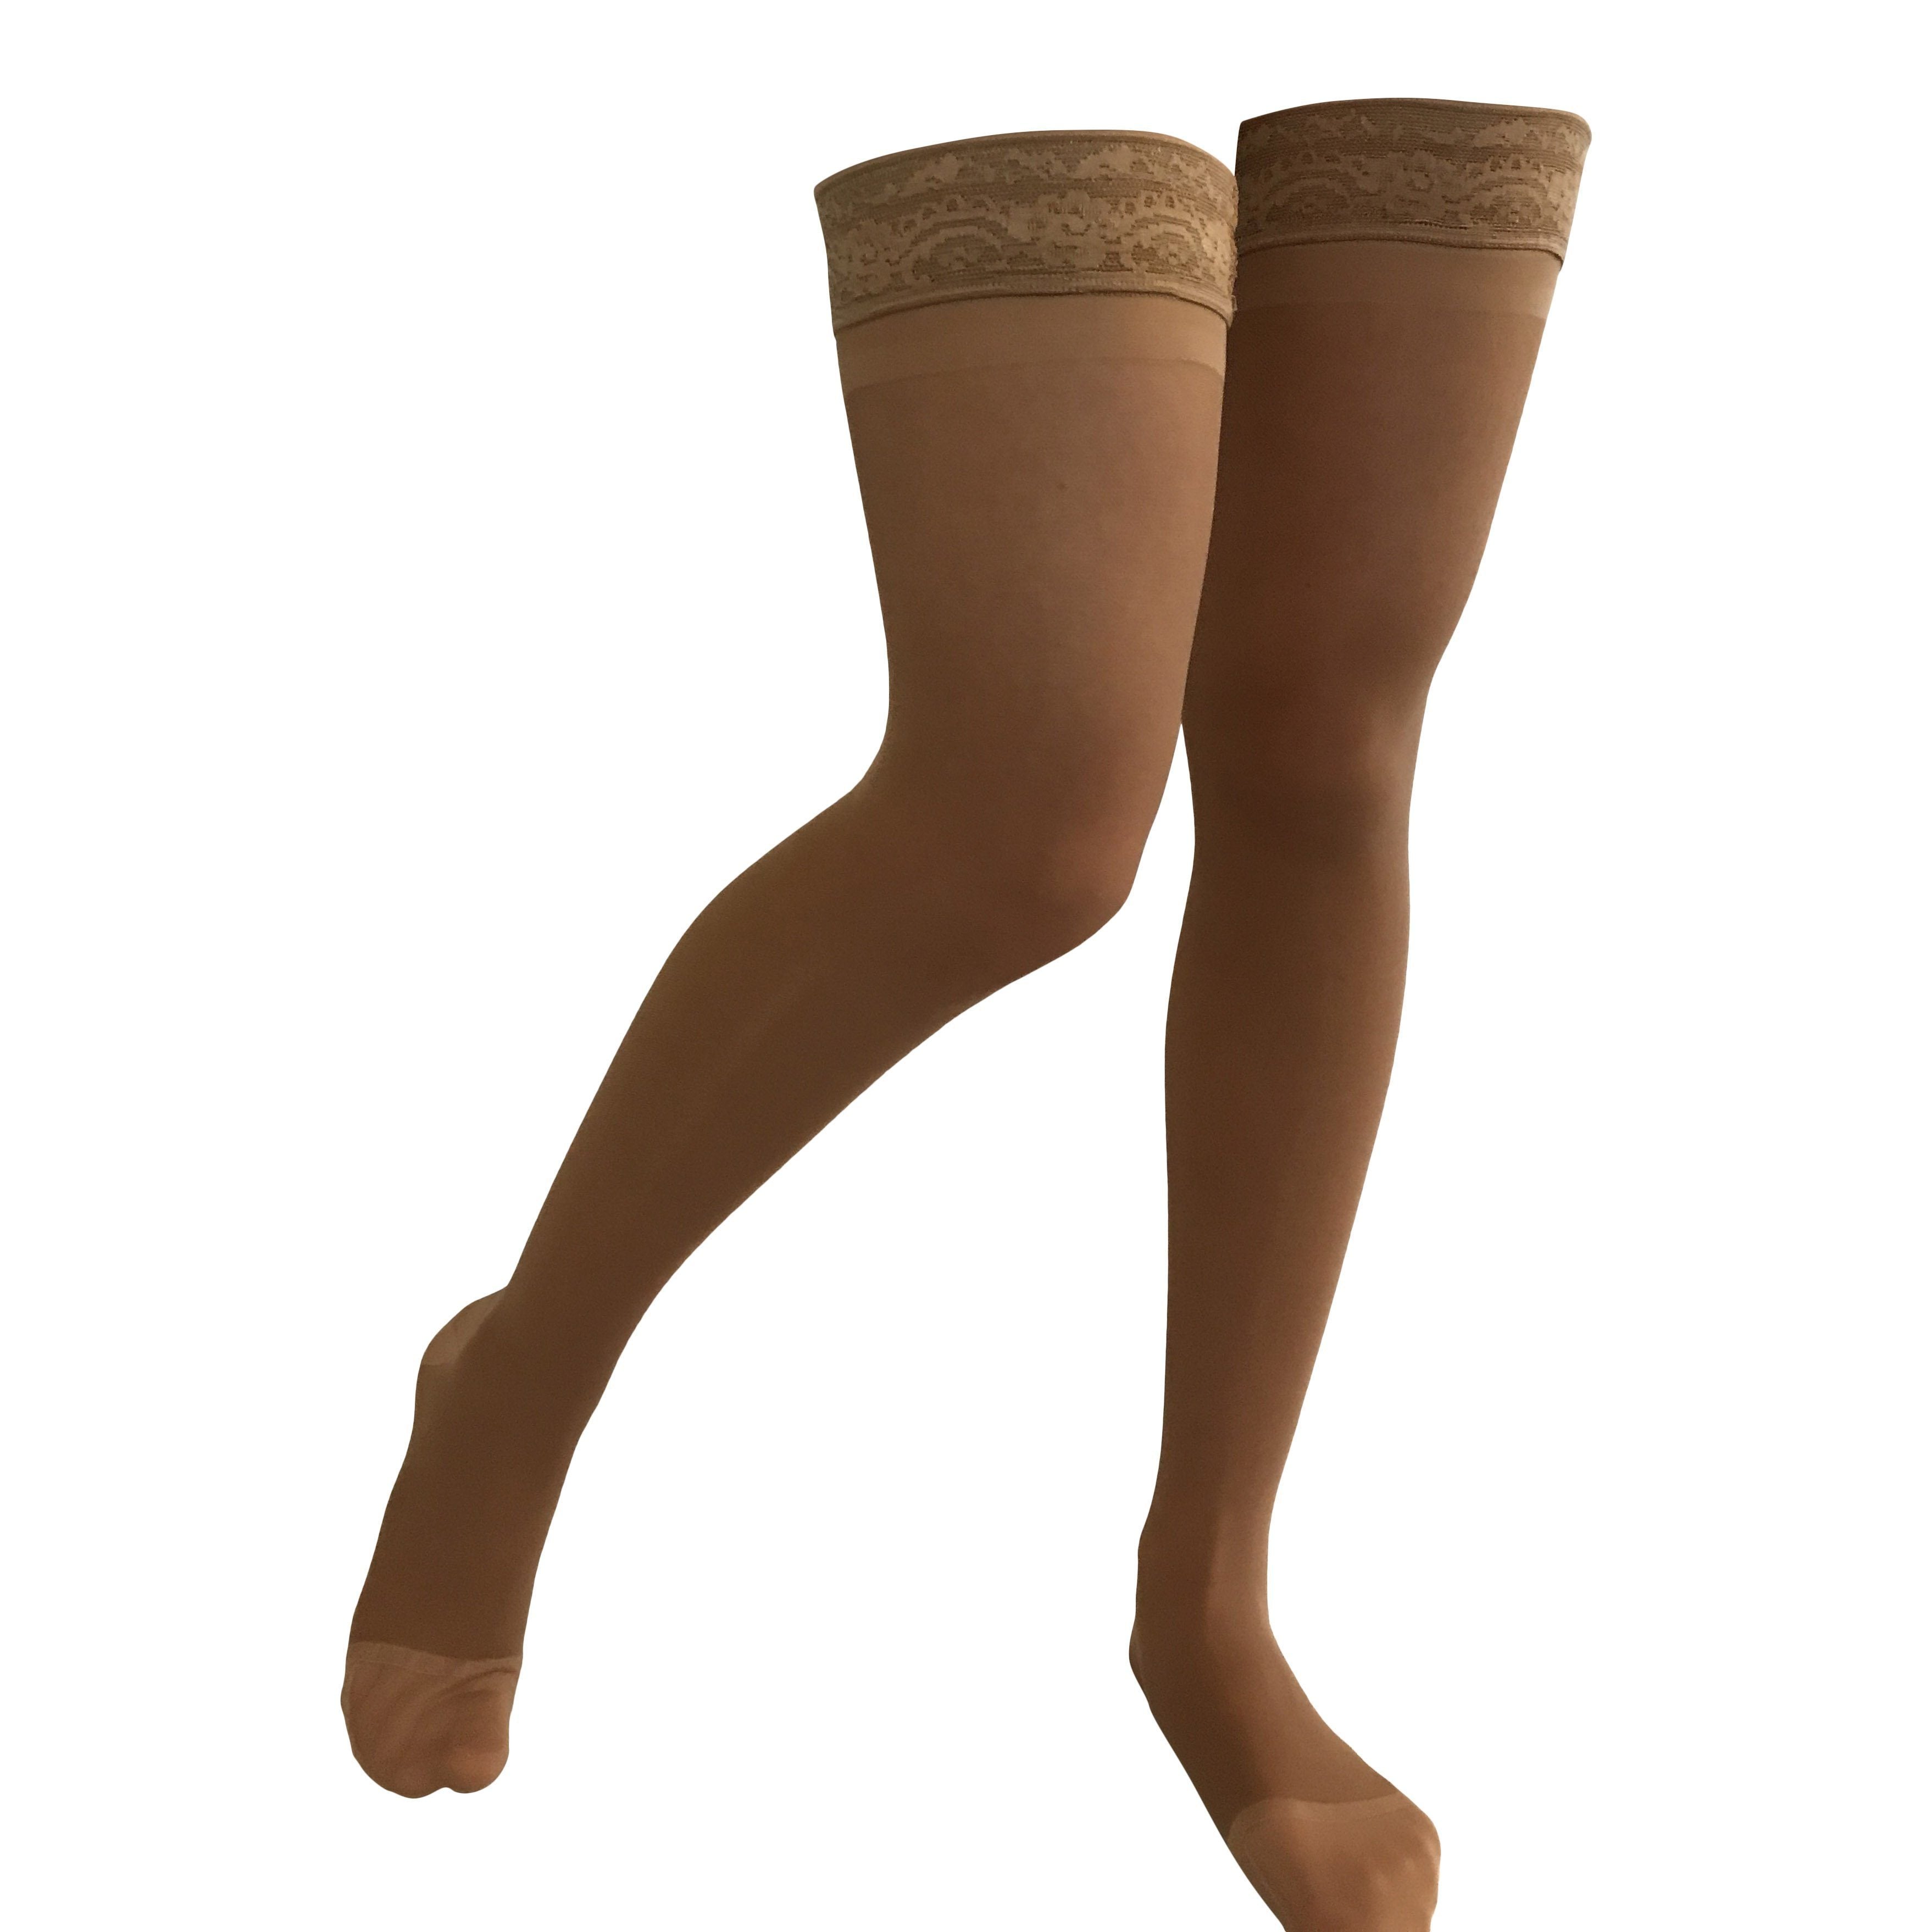 COMPRESSION PANTYHOSE, Products